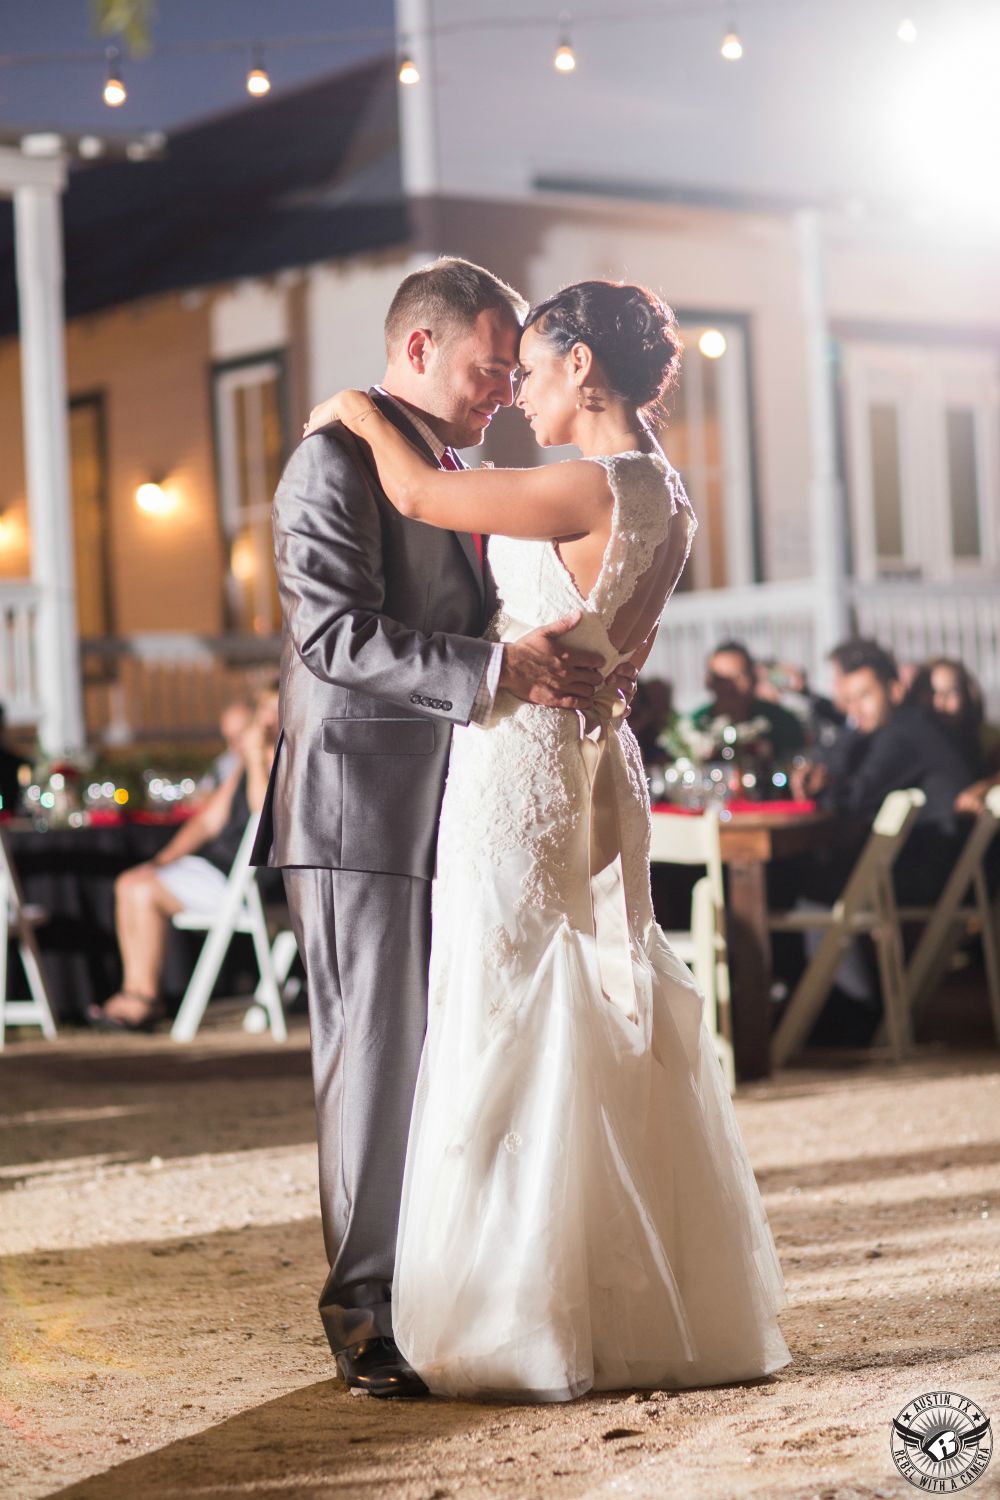 Picture of bride and groom dancing their first dance in the open air outside at their wedding reception at Star Hill Ranch Hill Country wedding venue taken by Austin wedding photographer.